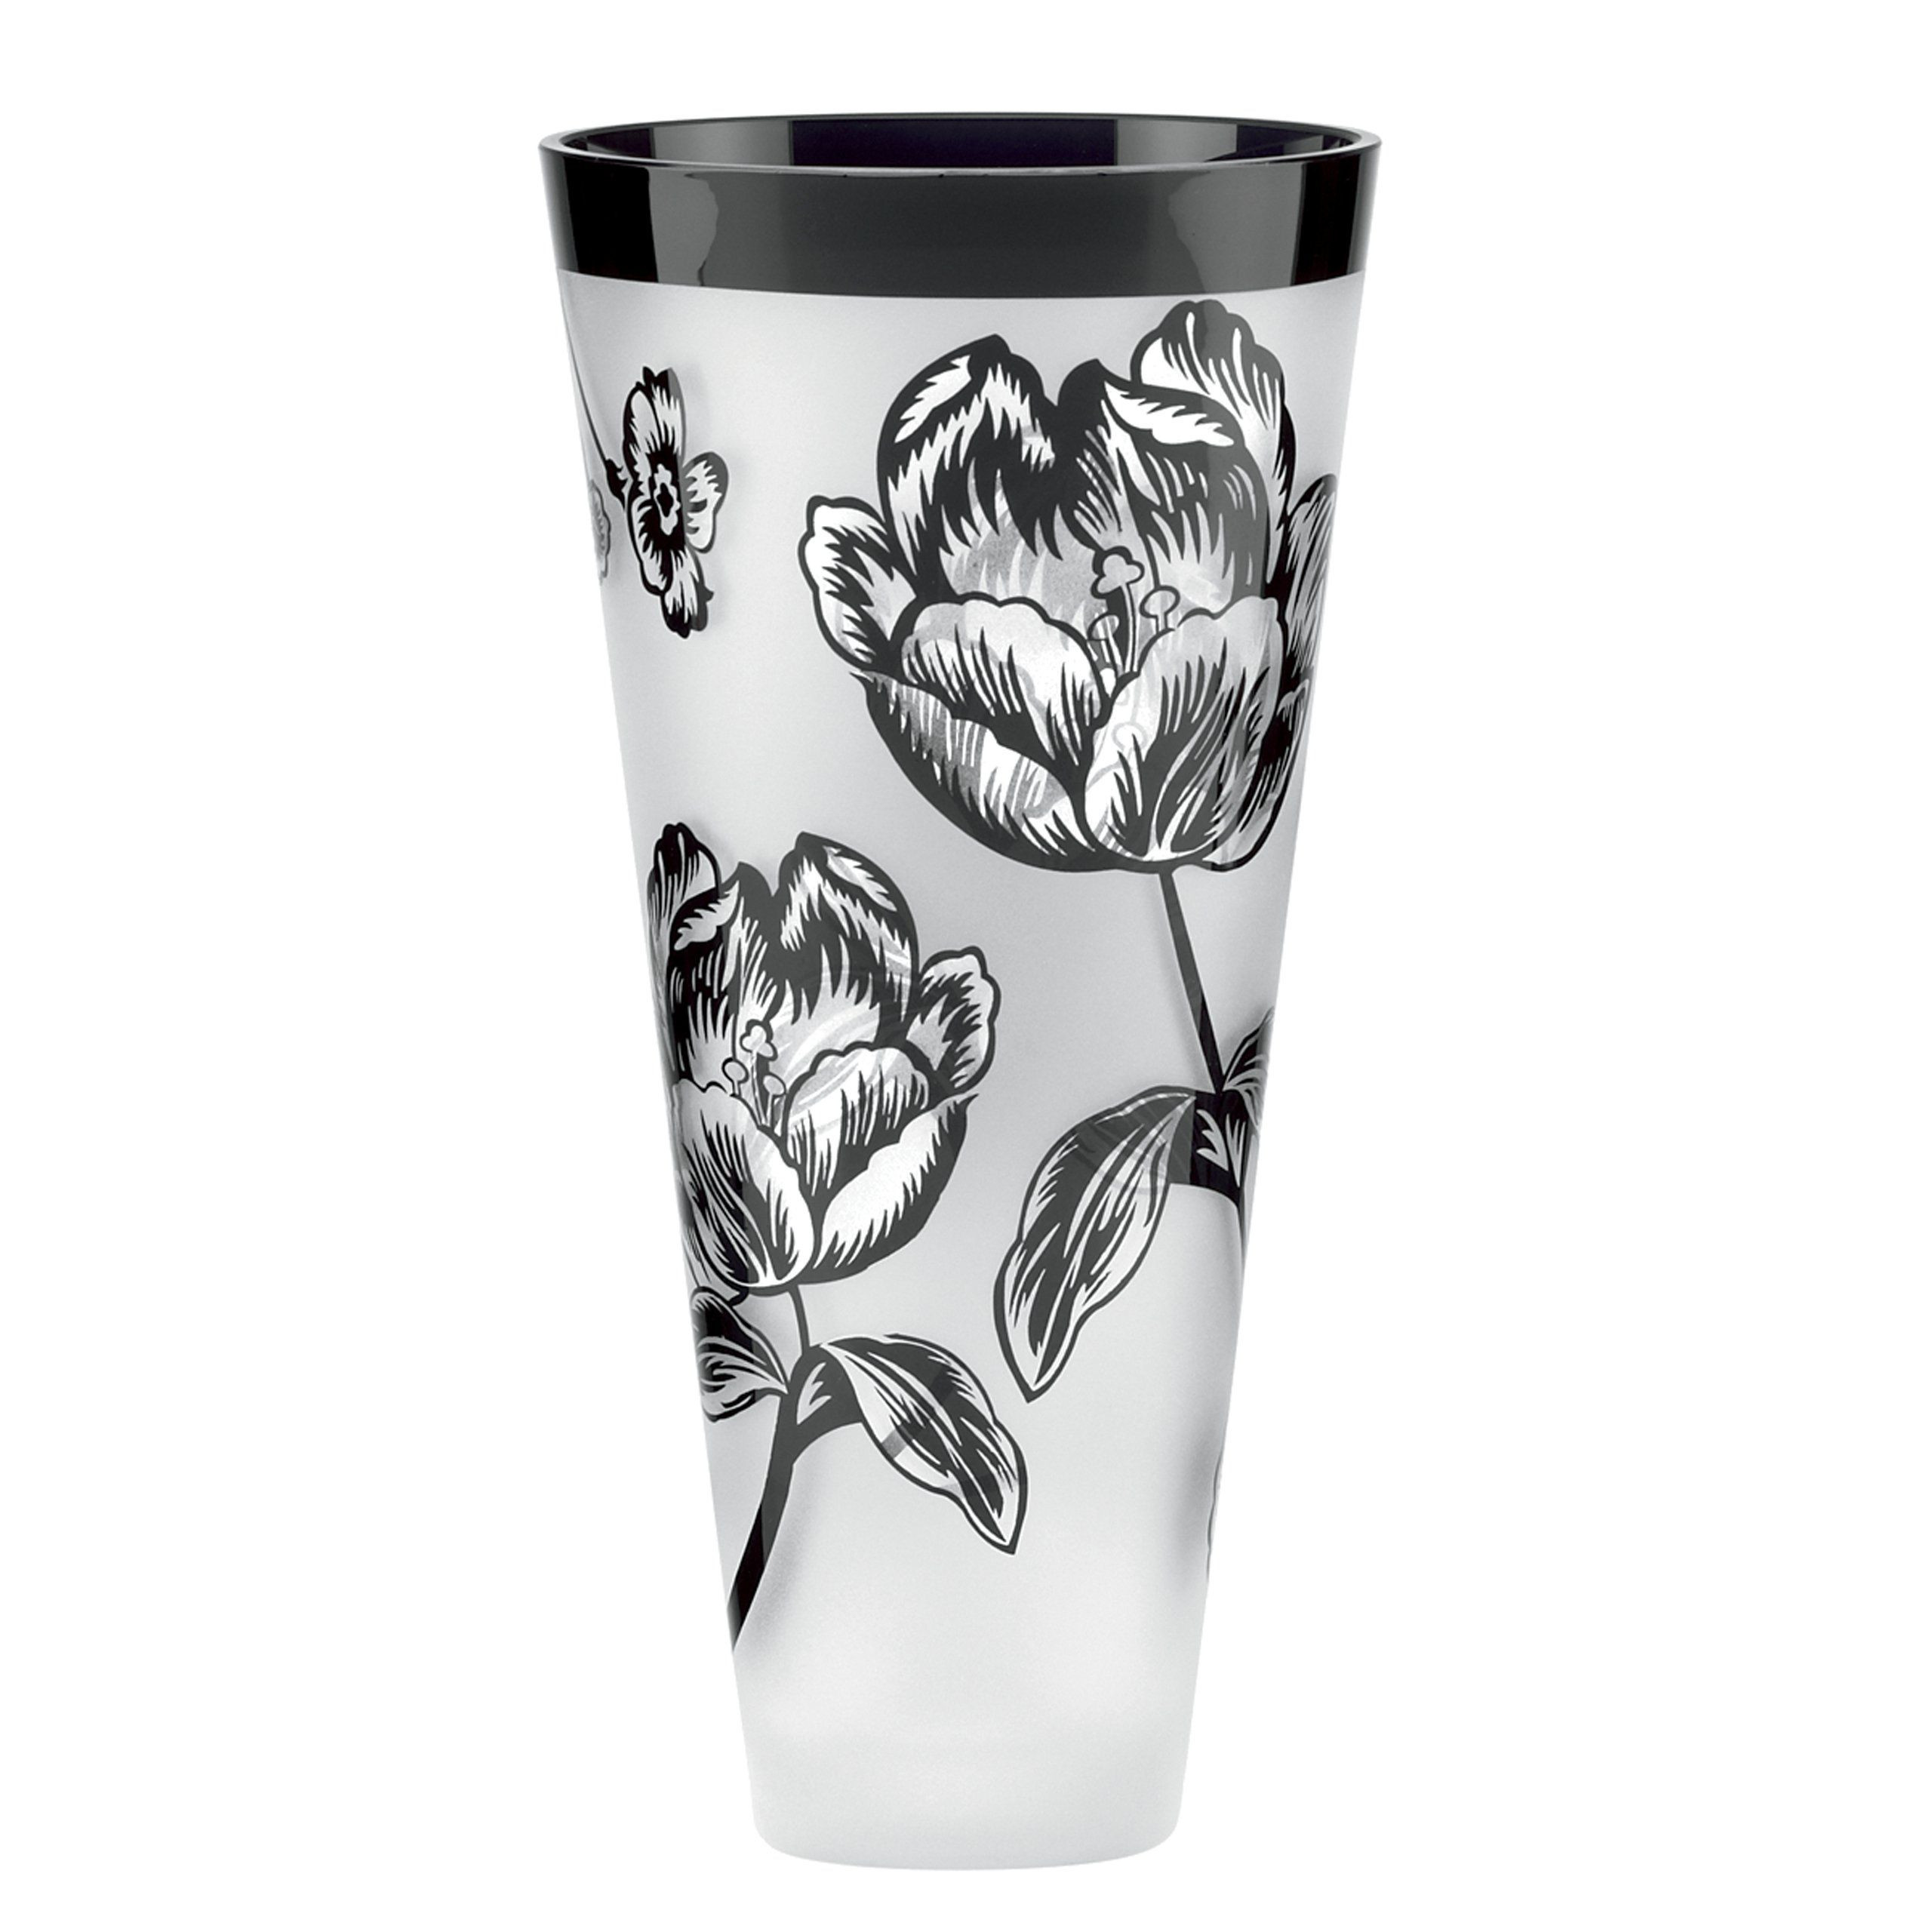 27 Fabulous Lenox Crystal Flower Vase 2024 free download lenox crystal flower vase of lenox midnight blossom bud vase 8 inch crafted of non lead crystal throughout lenox midnight blossom bud vase 8 inch crafted of non lead crystal